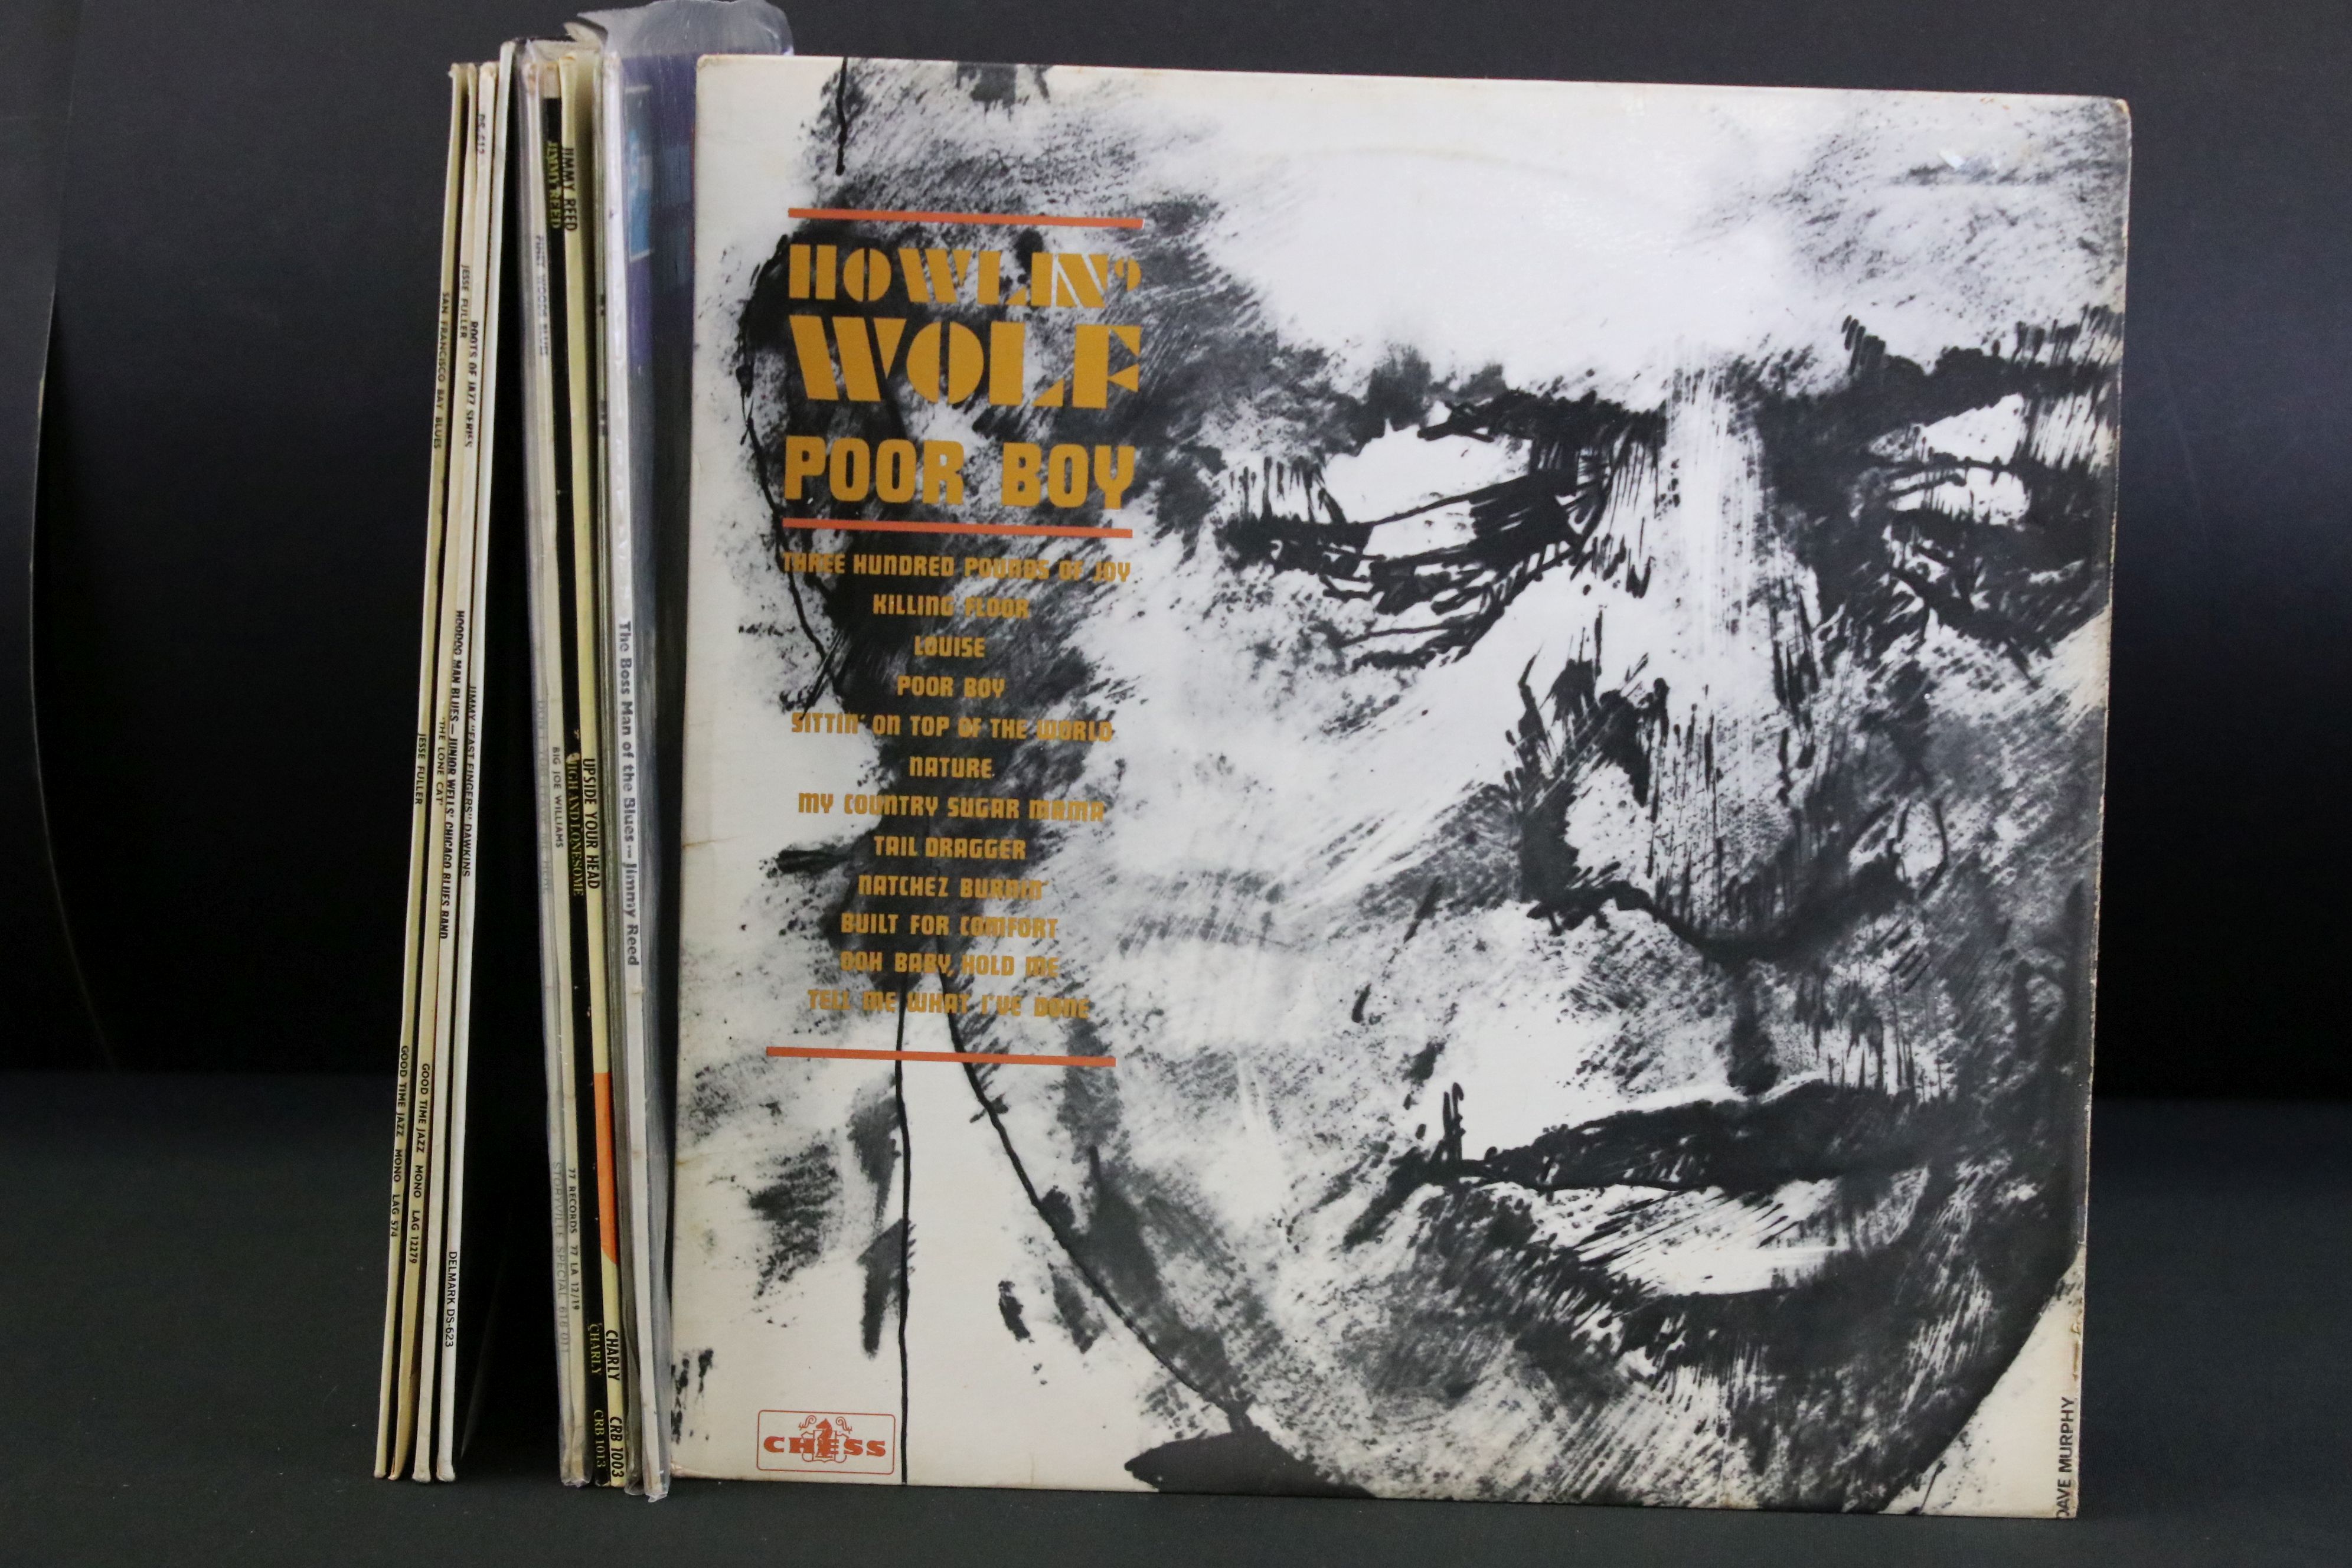 Vinyl - 11 rare blues albums to include Howlin’ Wolf Poor Boy (Original UK on Chess Records CRL